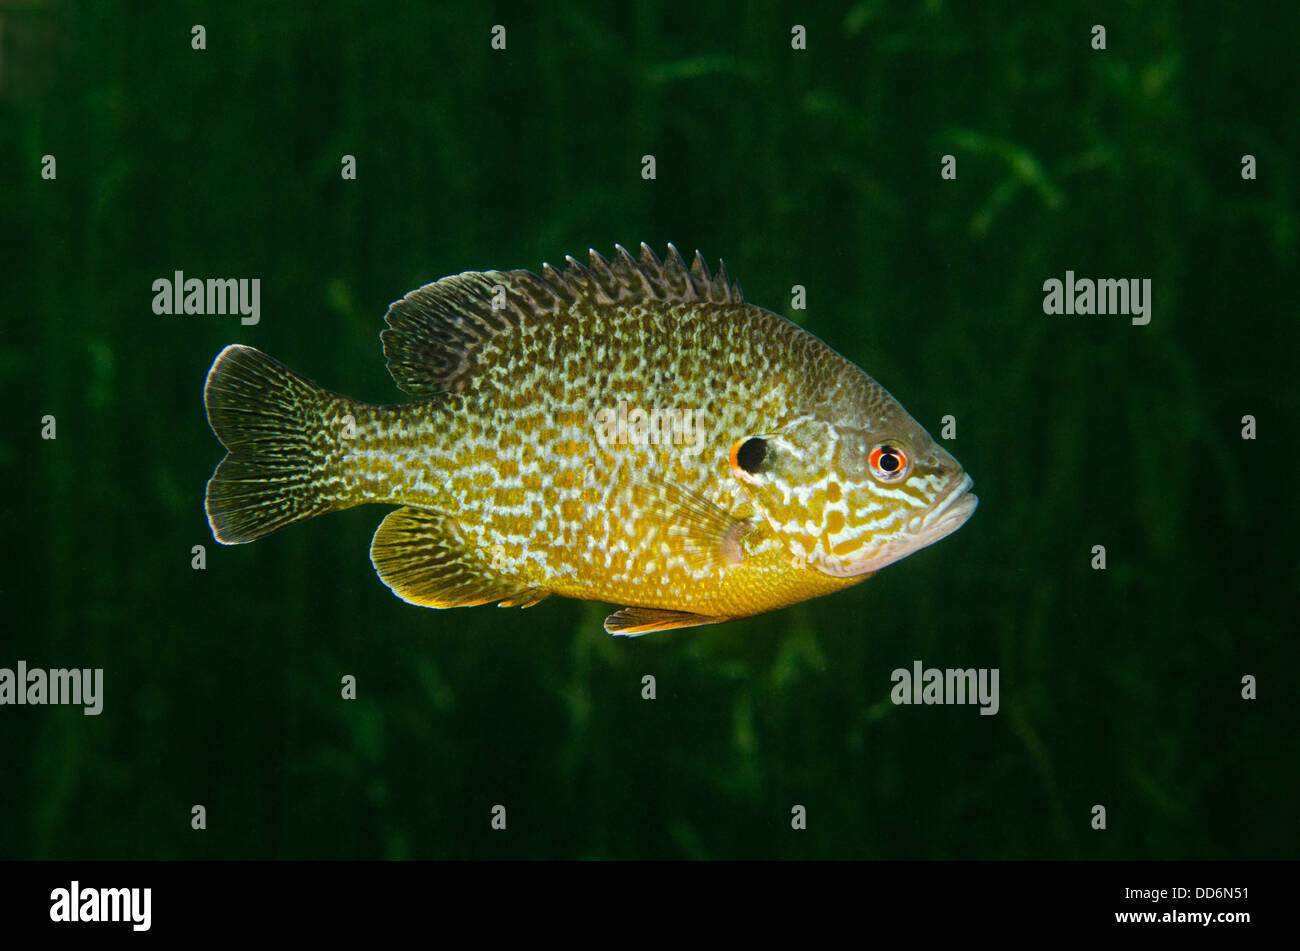 A "Pumpkinseed" freshwater fish, Lepomis gibbosus, swims in an abandoned quarry. Stock Photo